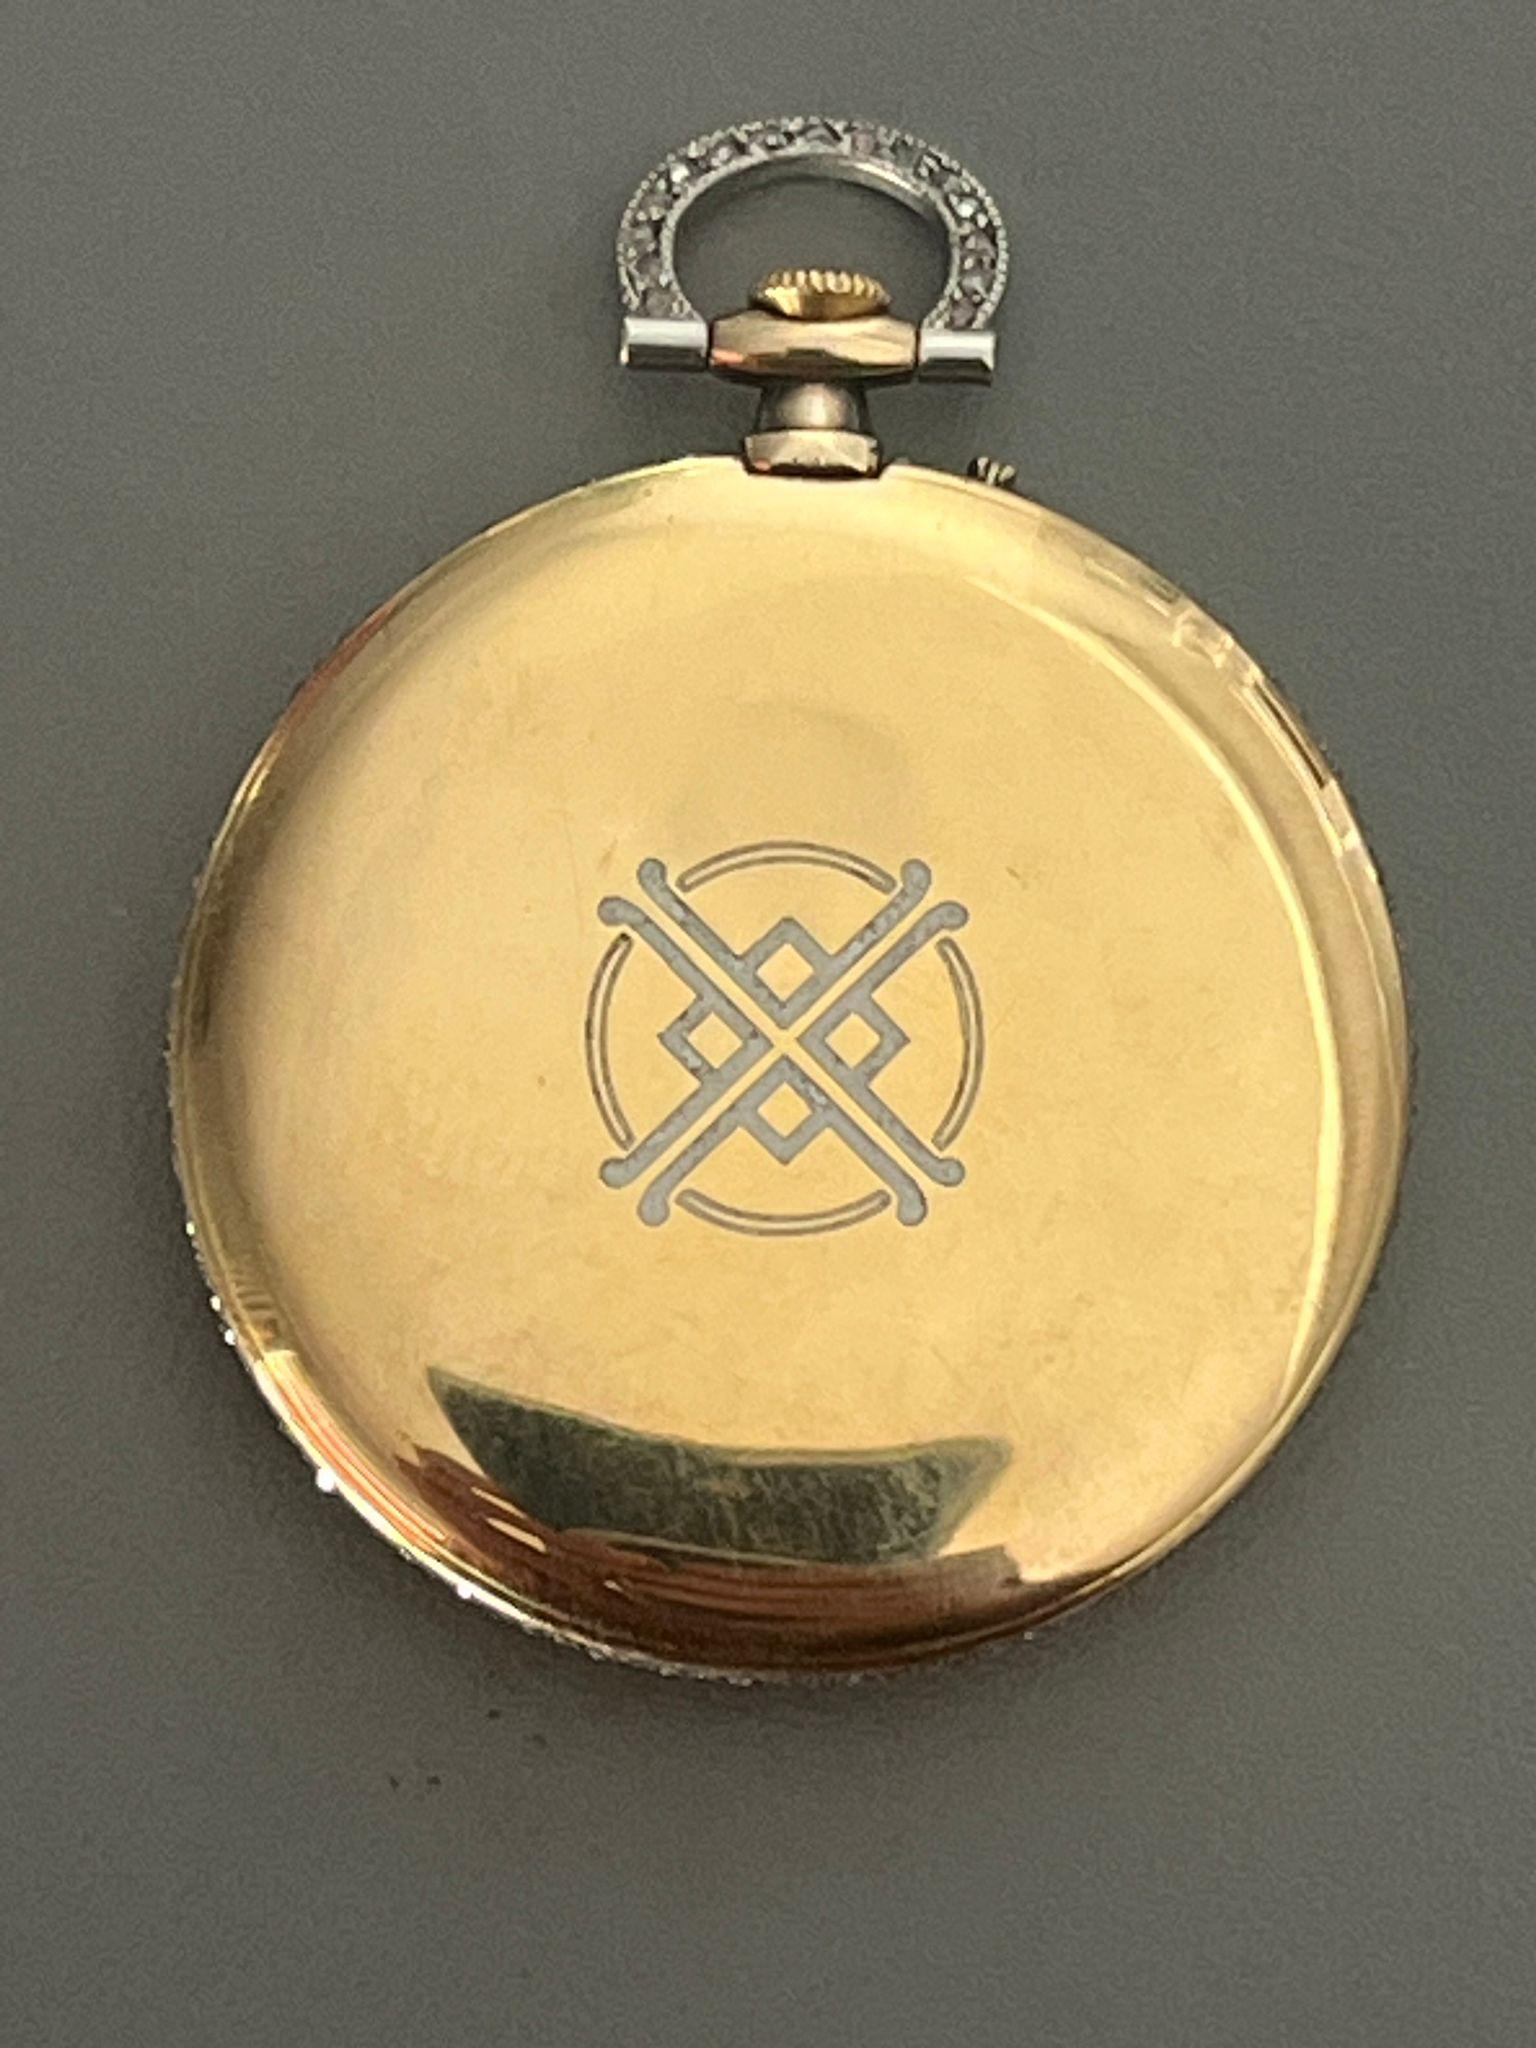 A remarkable 18kt yellow gold and platinum pocket watch by Cartier, dating back to the Belle Époque era, circa 1907. This exquisite timepiece is not only a functional accessory but also a valuable piece of history and craftsmanship.
Cartier is a